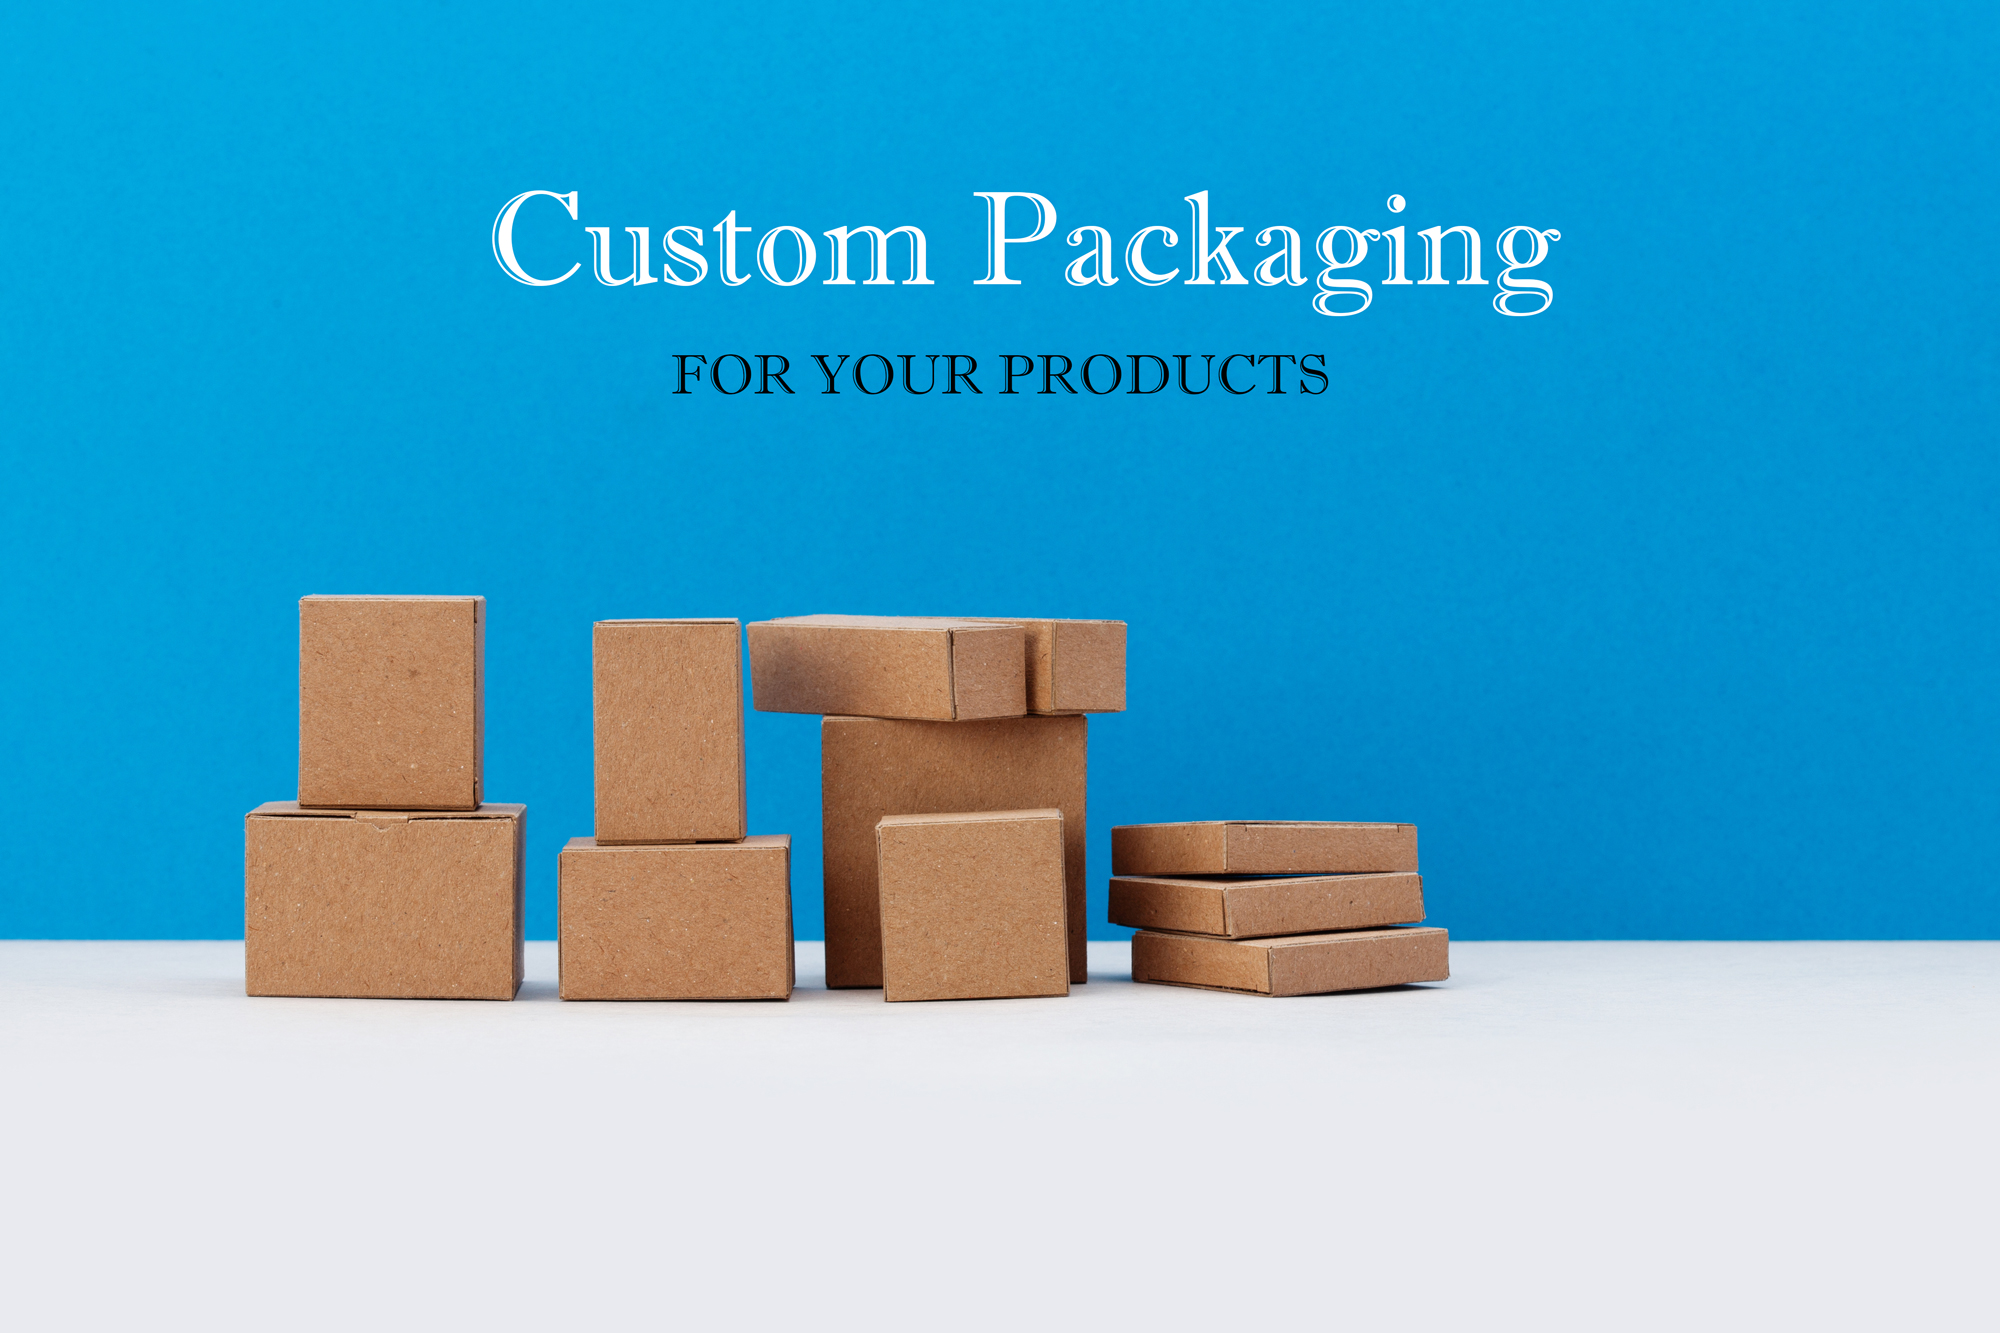 Custome-packaging-for-your-products-suggested-by-stylewati